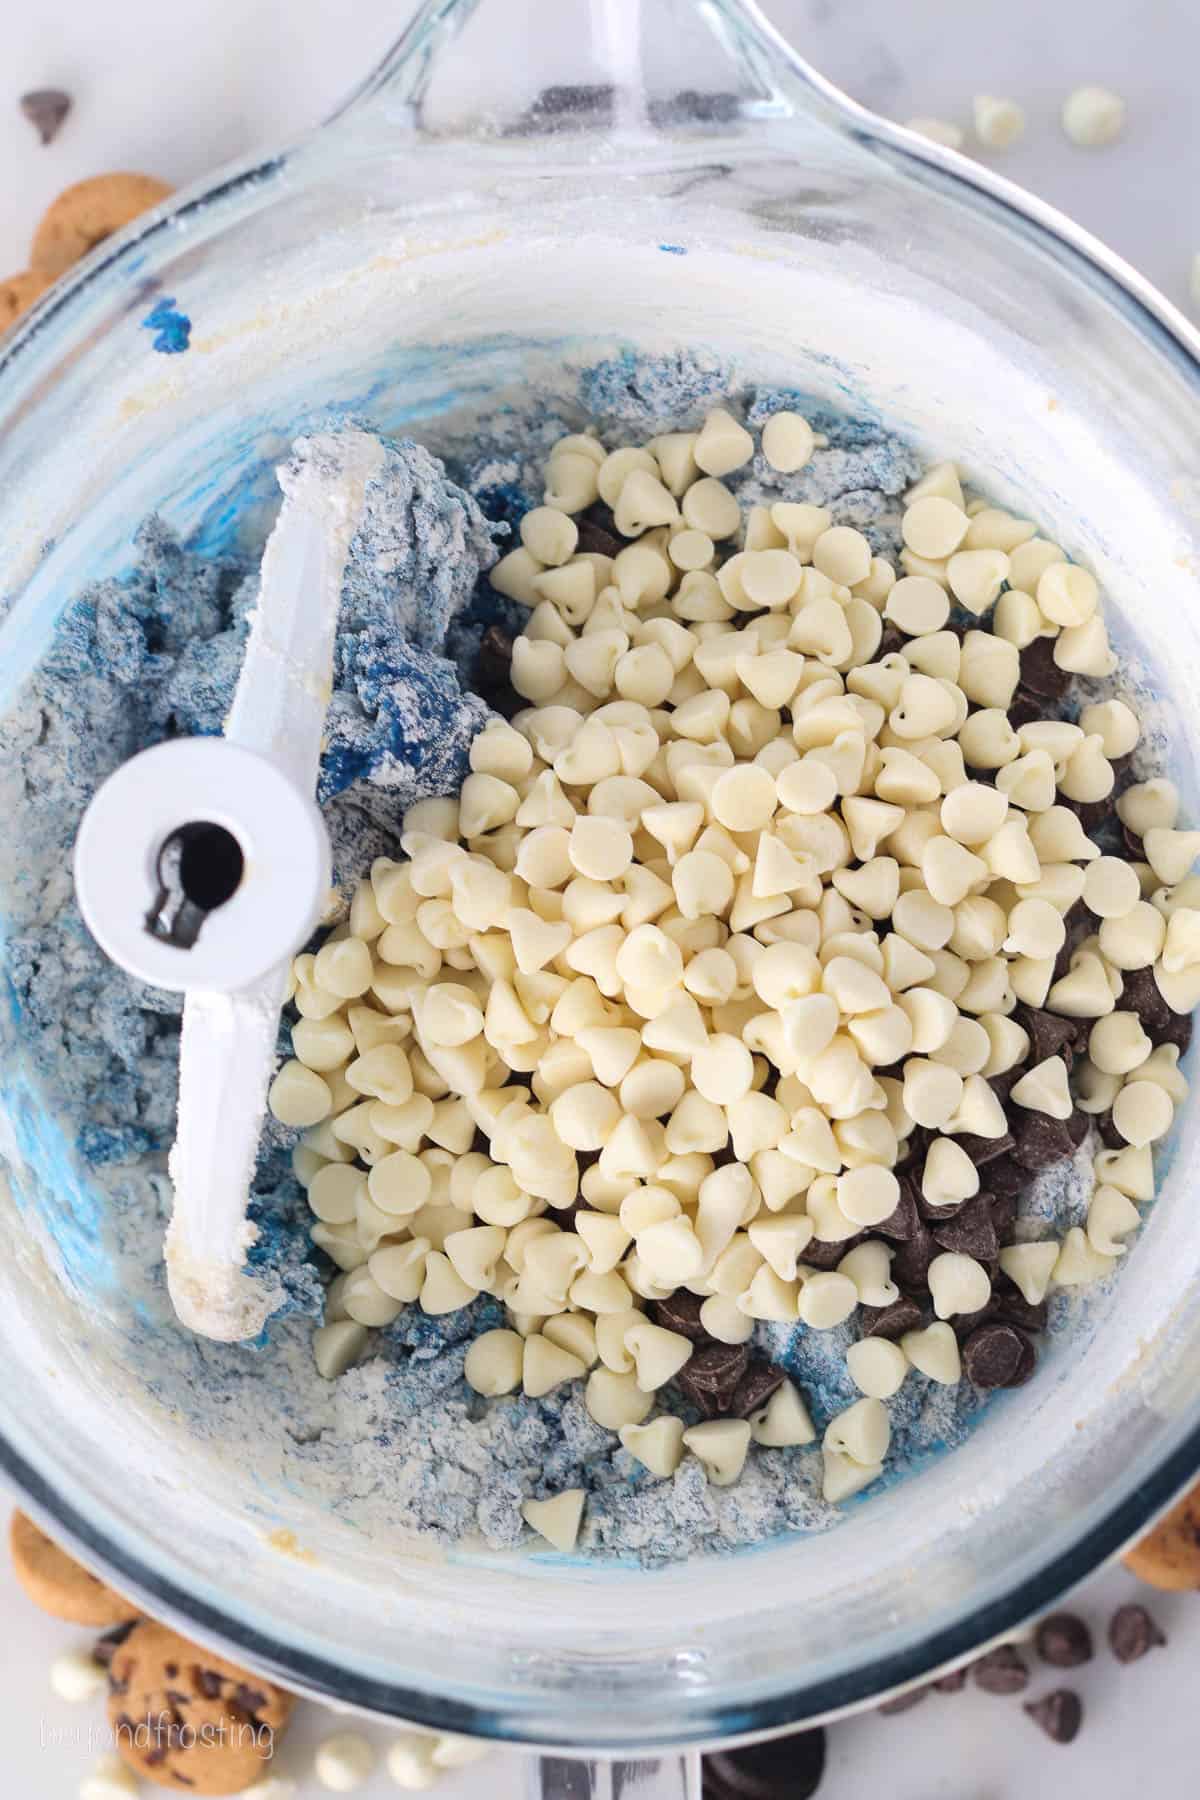 White chocolate chips and chocolate chips added to a bowl of blue cookie dough.